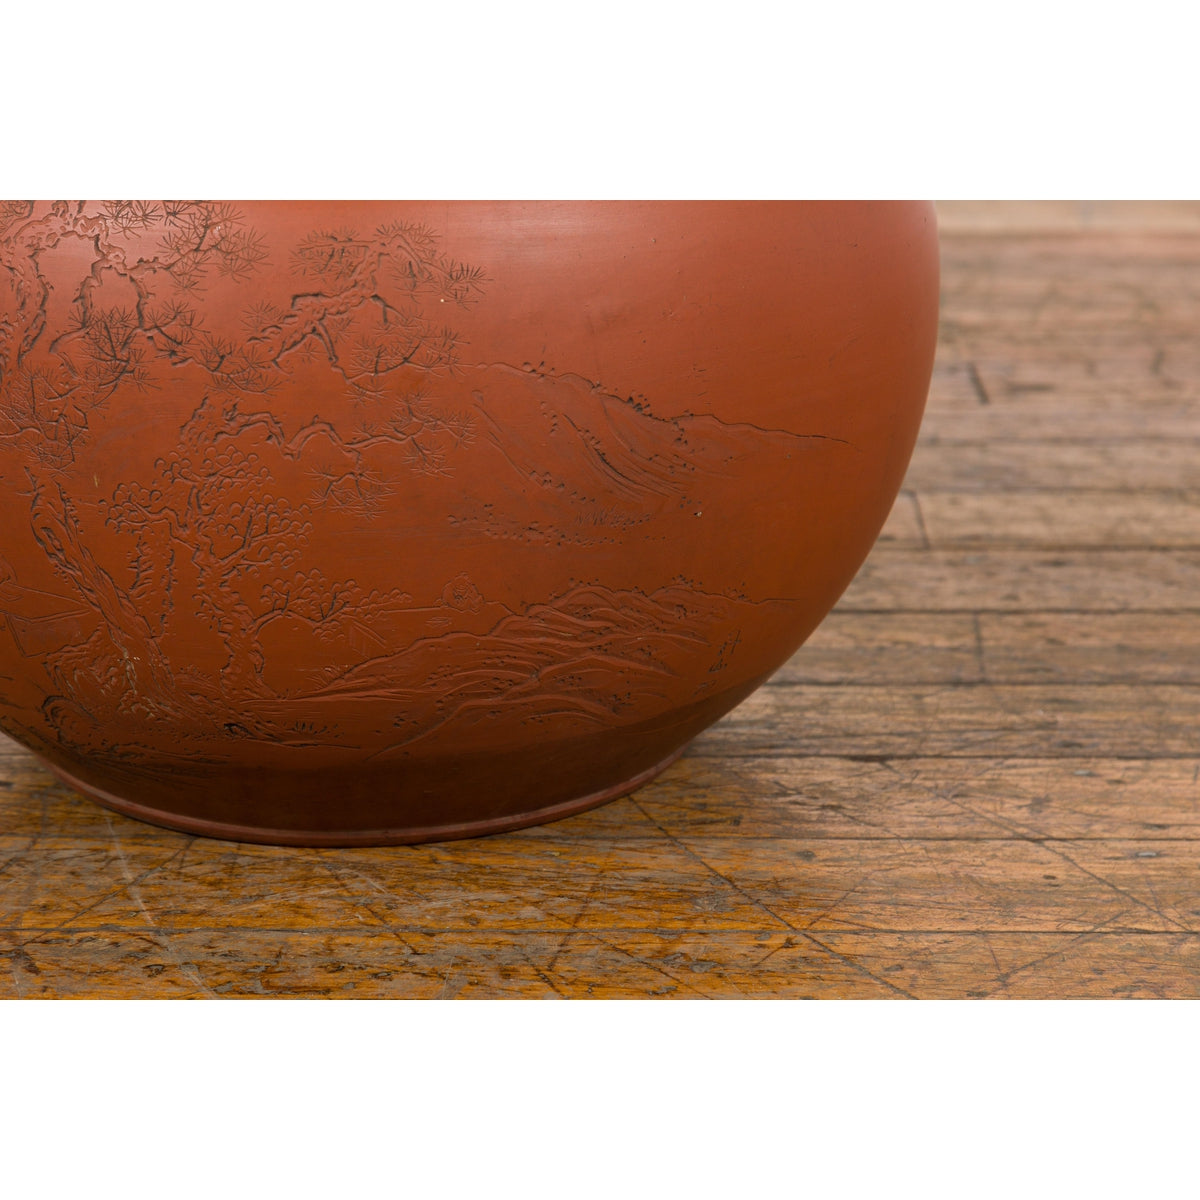 Orange Circular Antique Planter with Etched Design-YN7819-7. Asian & Chinese Furniture, Art, Antiques, Vintage Home Décor for sale at FEA Home